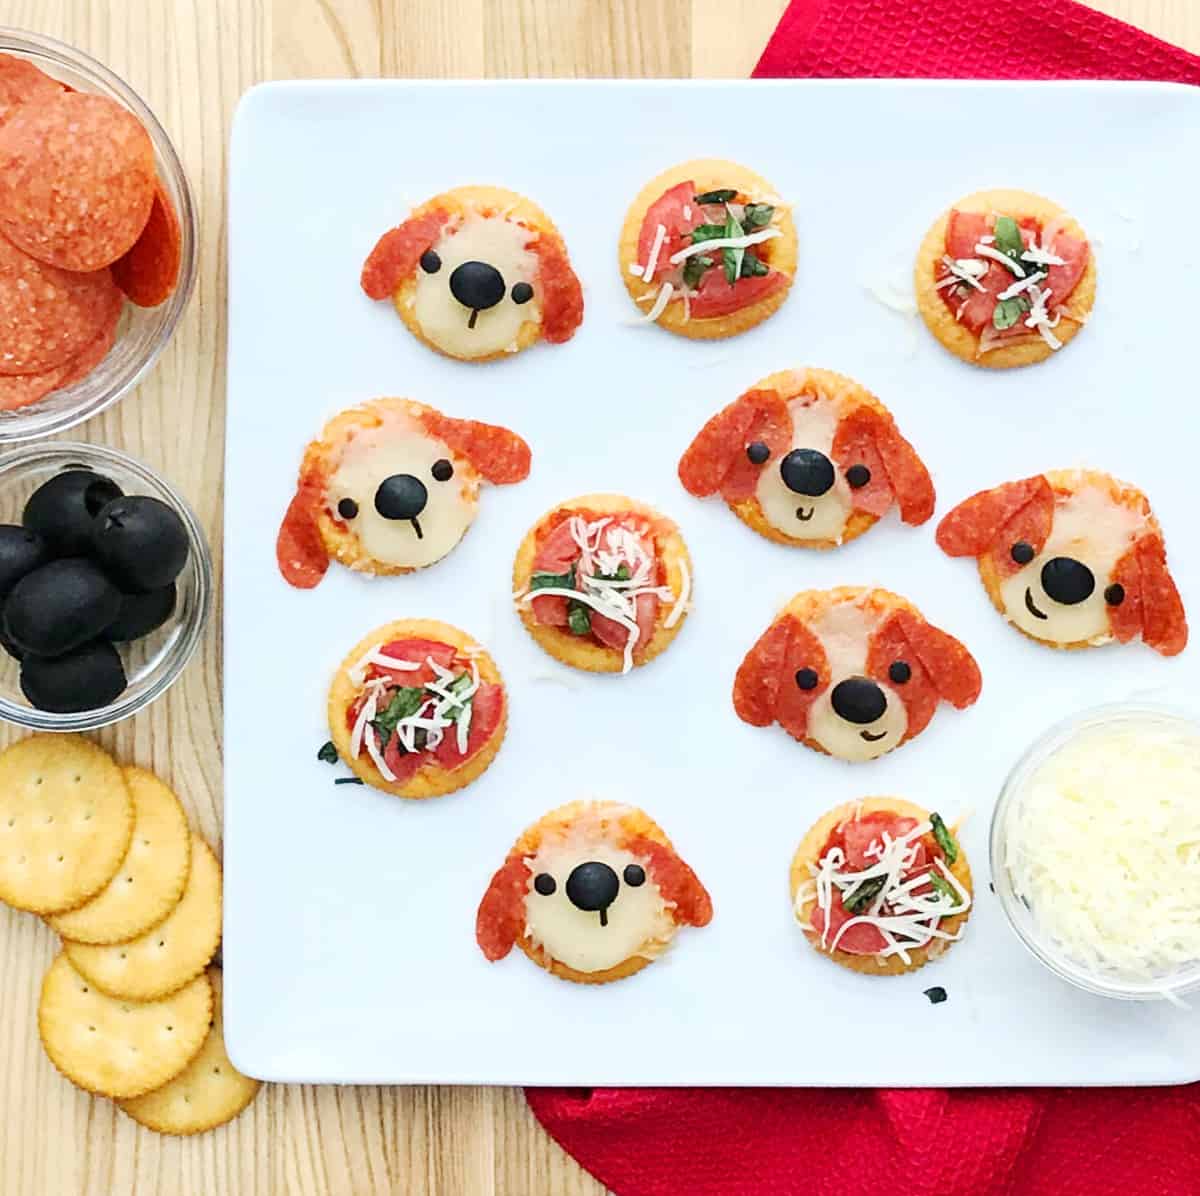 20 Different Ways To Make Pizza For Kids | Fun & Creative Ideas